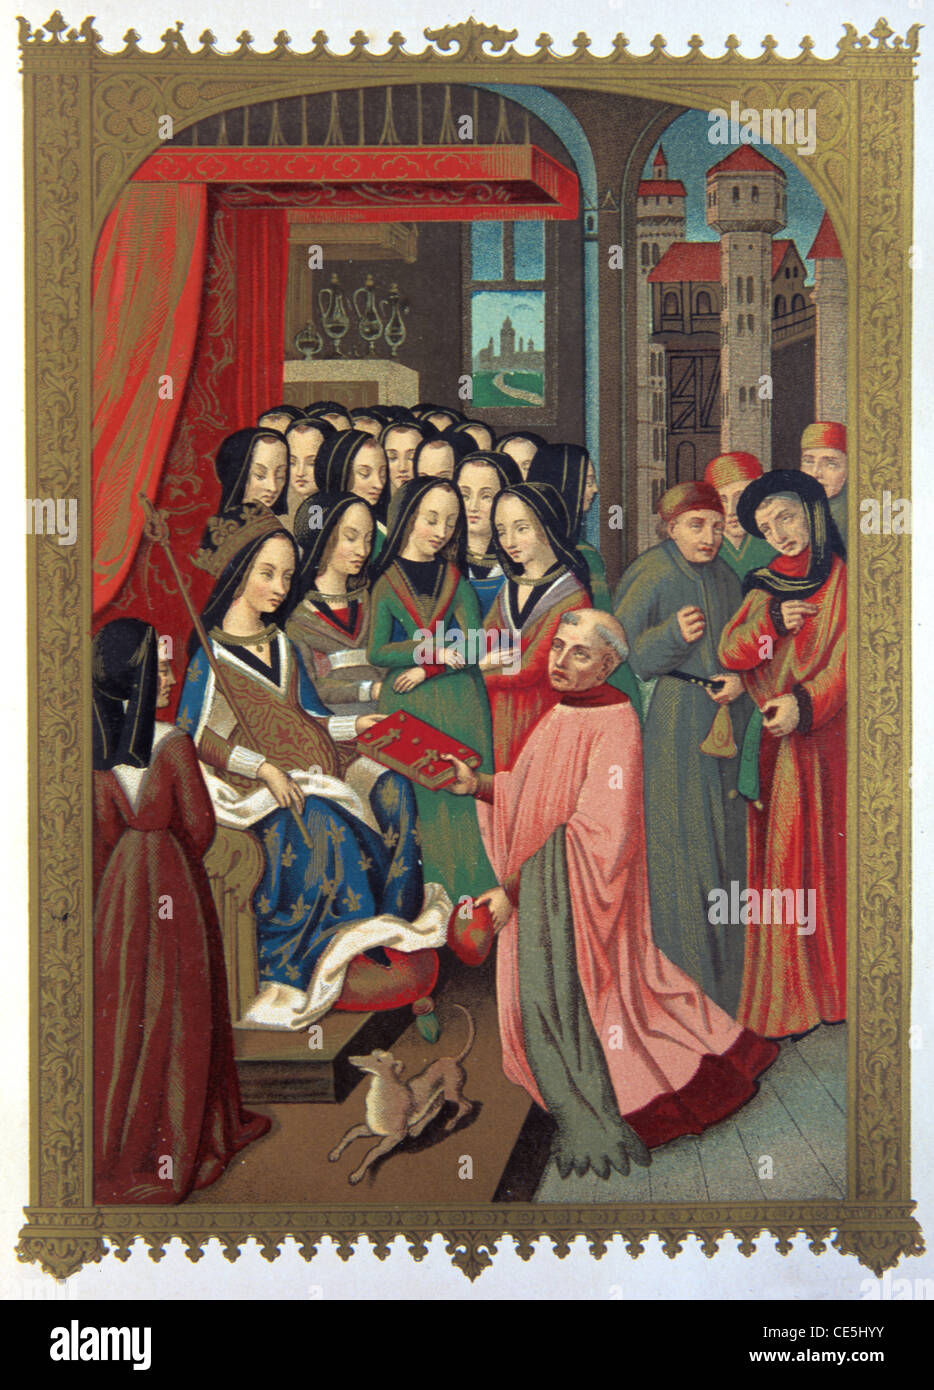 Royal French Ladies Court of Marie of Anjou (1404-63) Queen Consort of King Charles VII of France & Cardinal Robert Blondel. Vintage Illustrtation Stock Photo